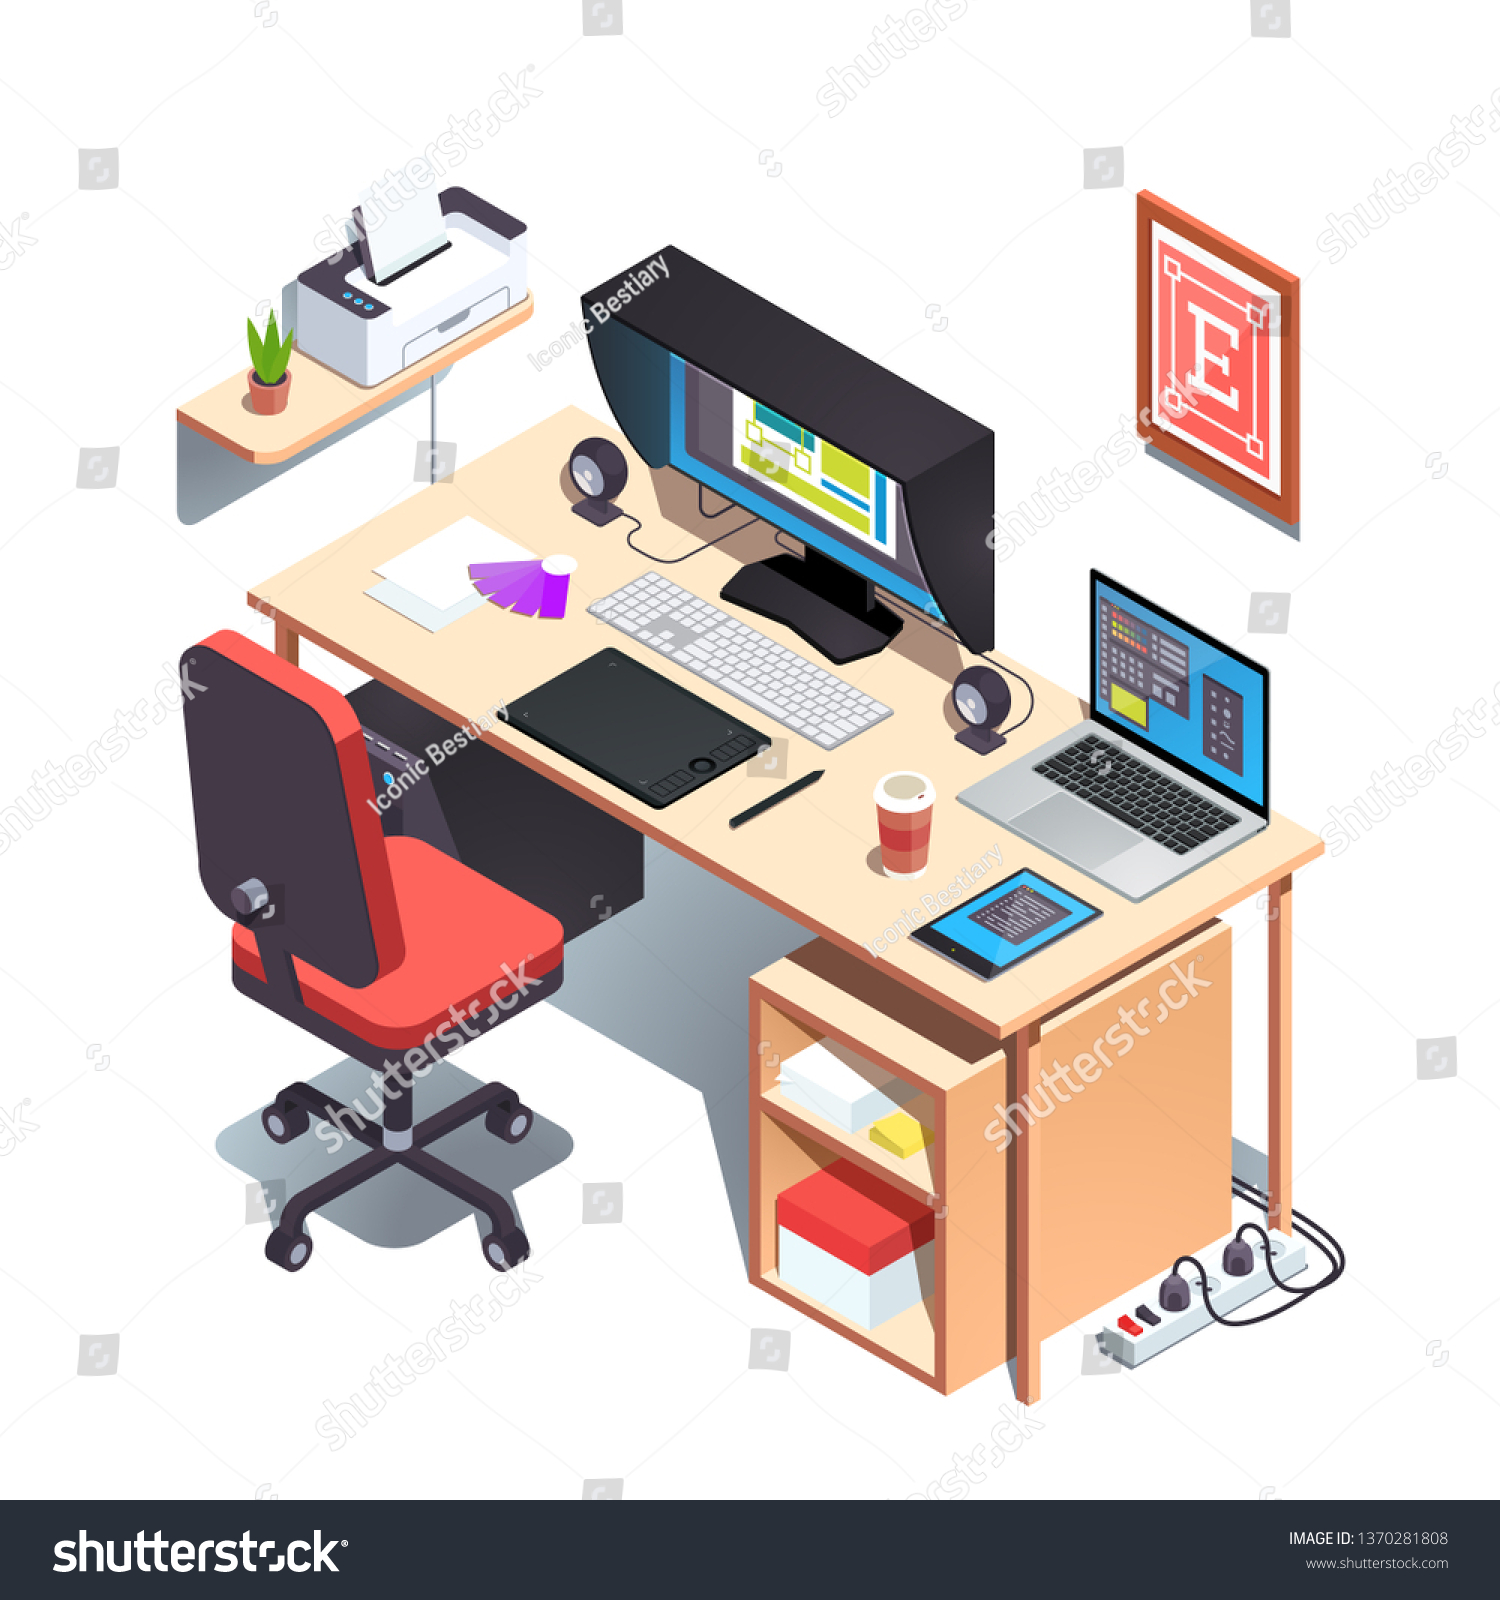 Graphic Designer Working Desk Opened Creative Stock Vector Royalty Free 1370281808,What Do Graphic Designers Make